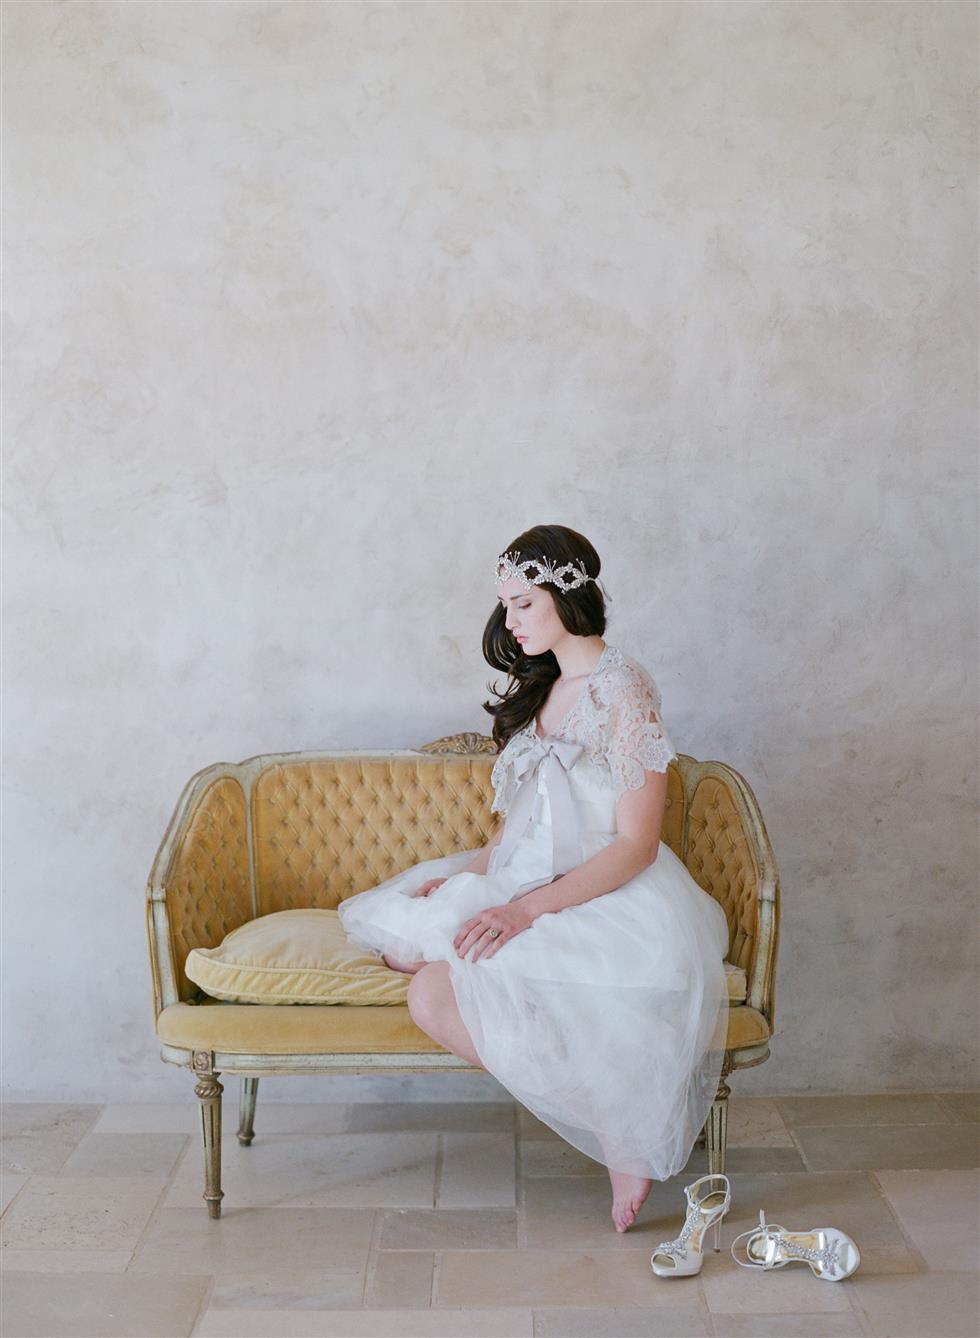 The Beautiful 2015 Bridal Collection from Myra Callan for Twigs & Honey - Aspen